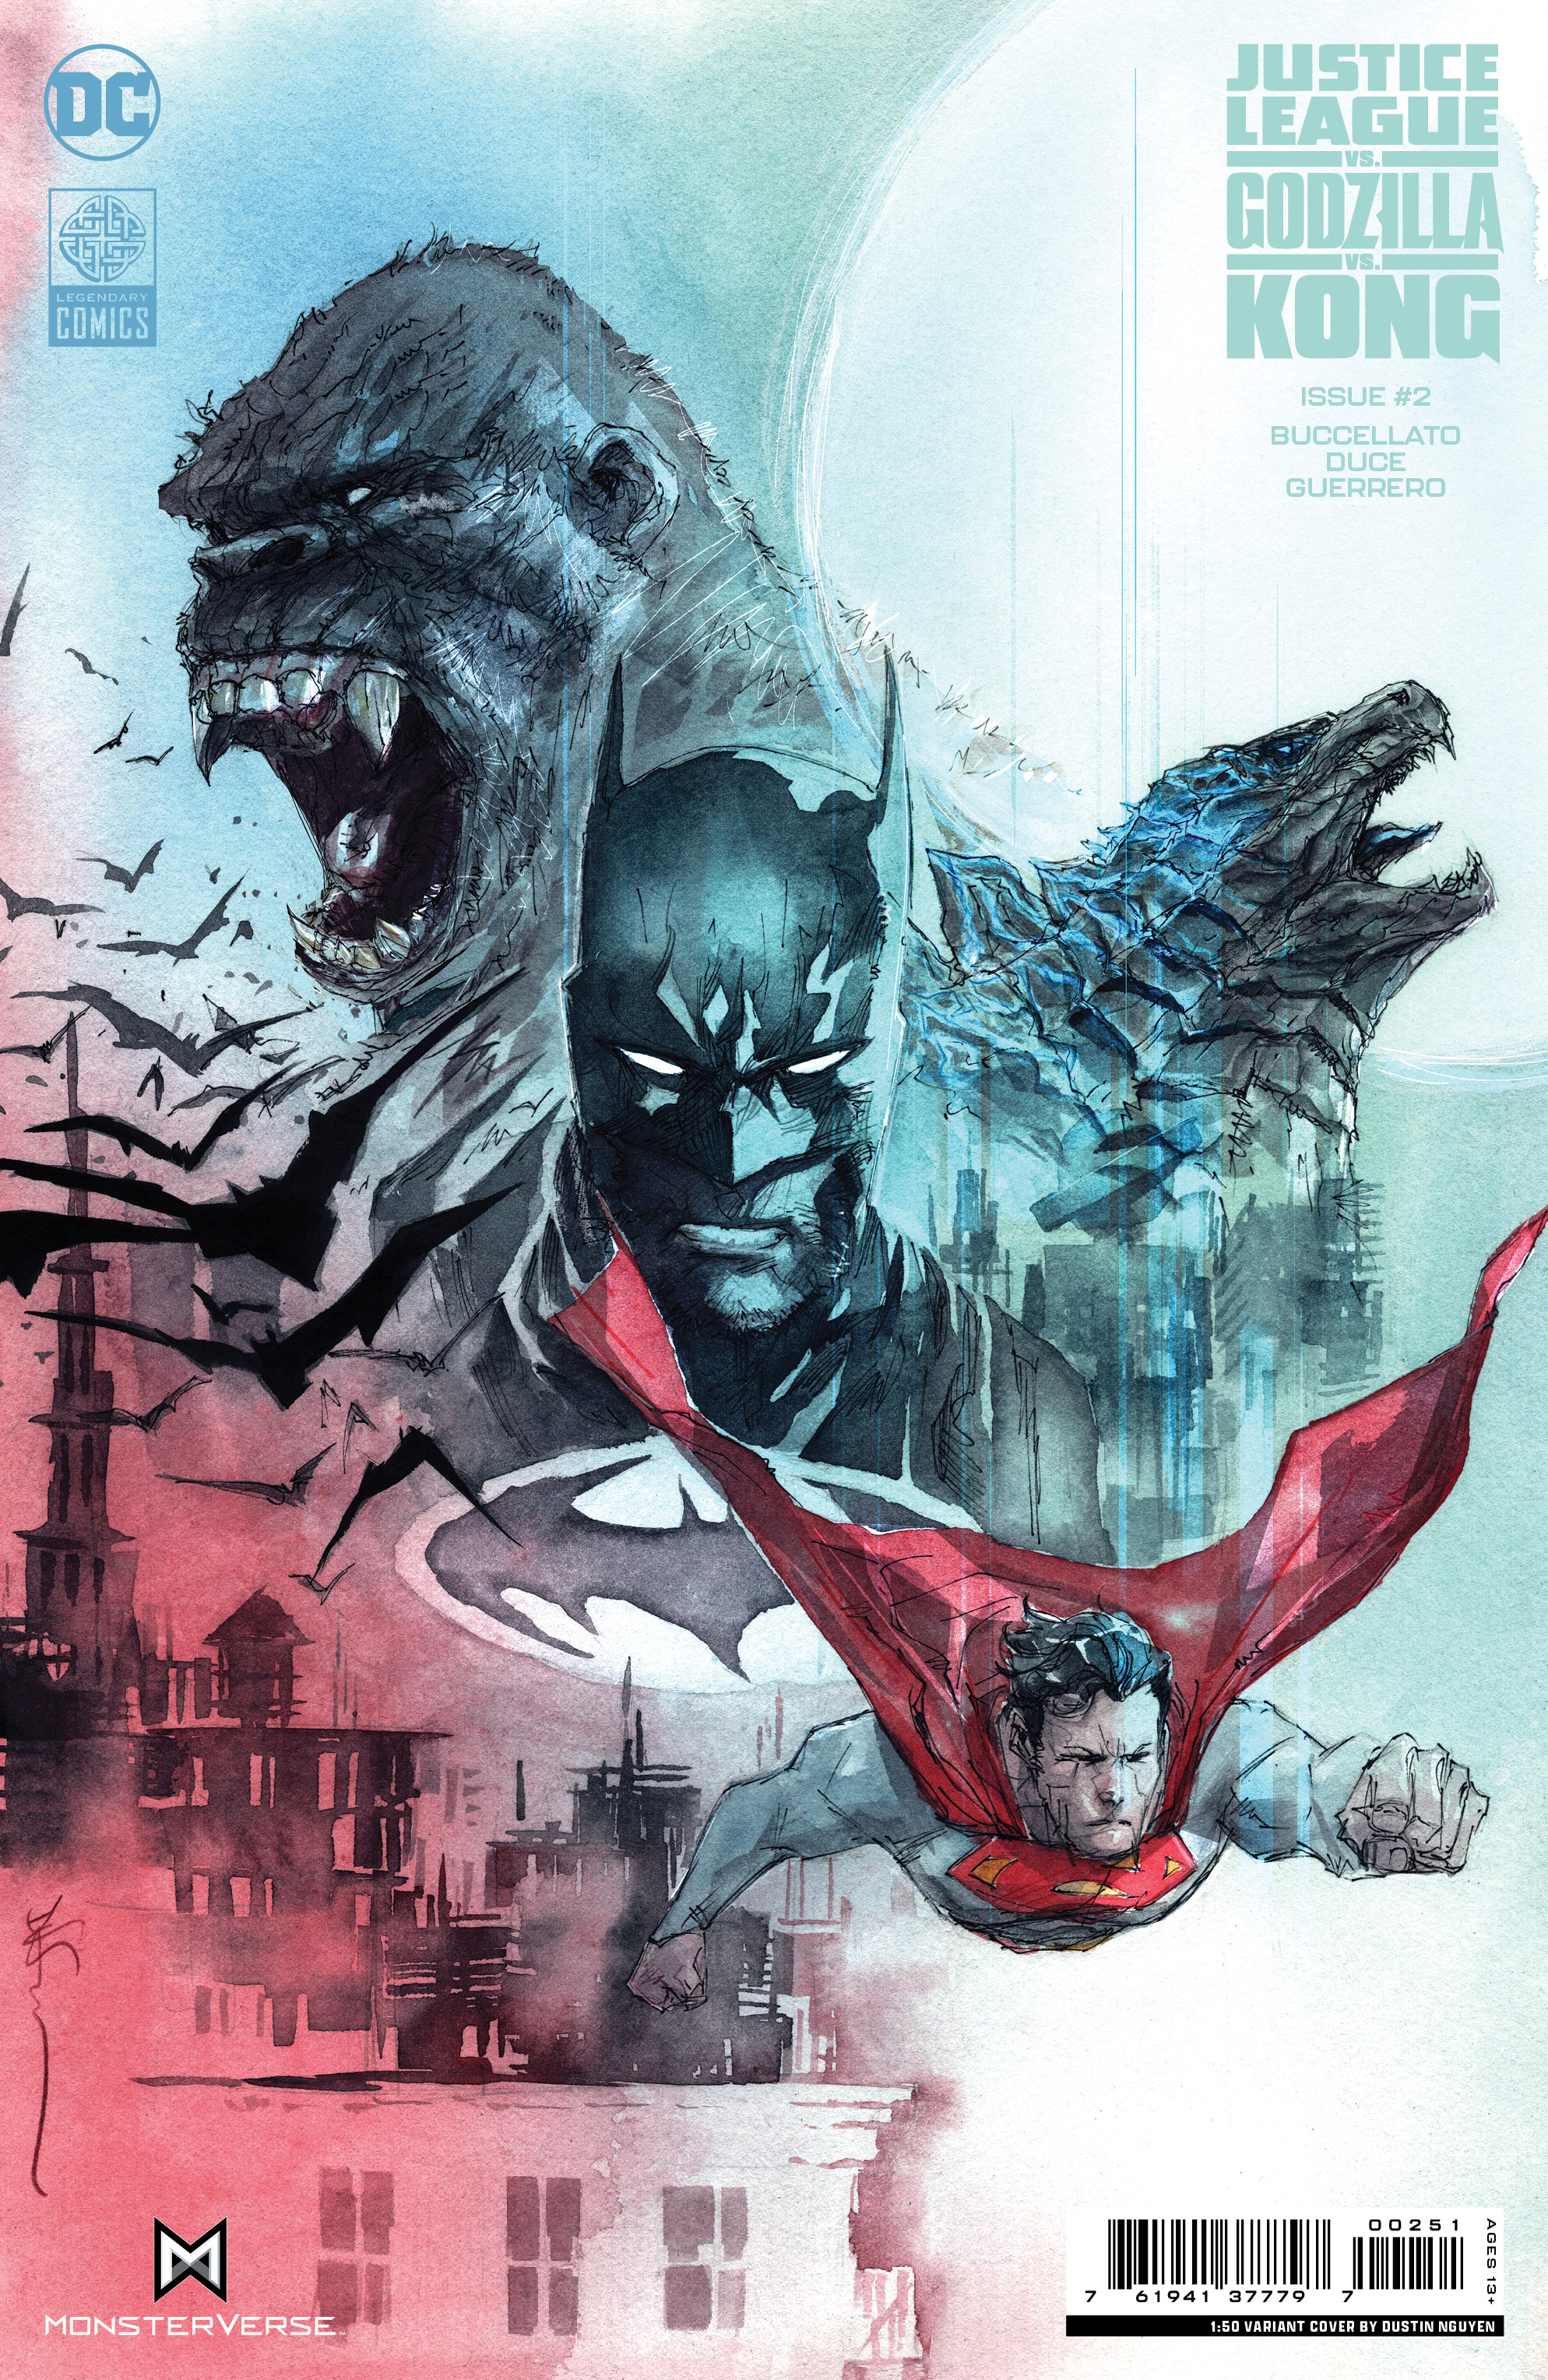 Justice League Vs Godzilla Vs Kong #2 Cover E 1 for 50 Incentive Dustin Nguyen Card Stock Variant (Of 7)